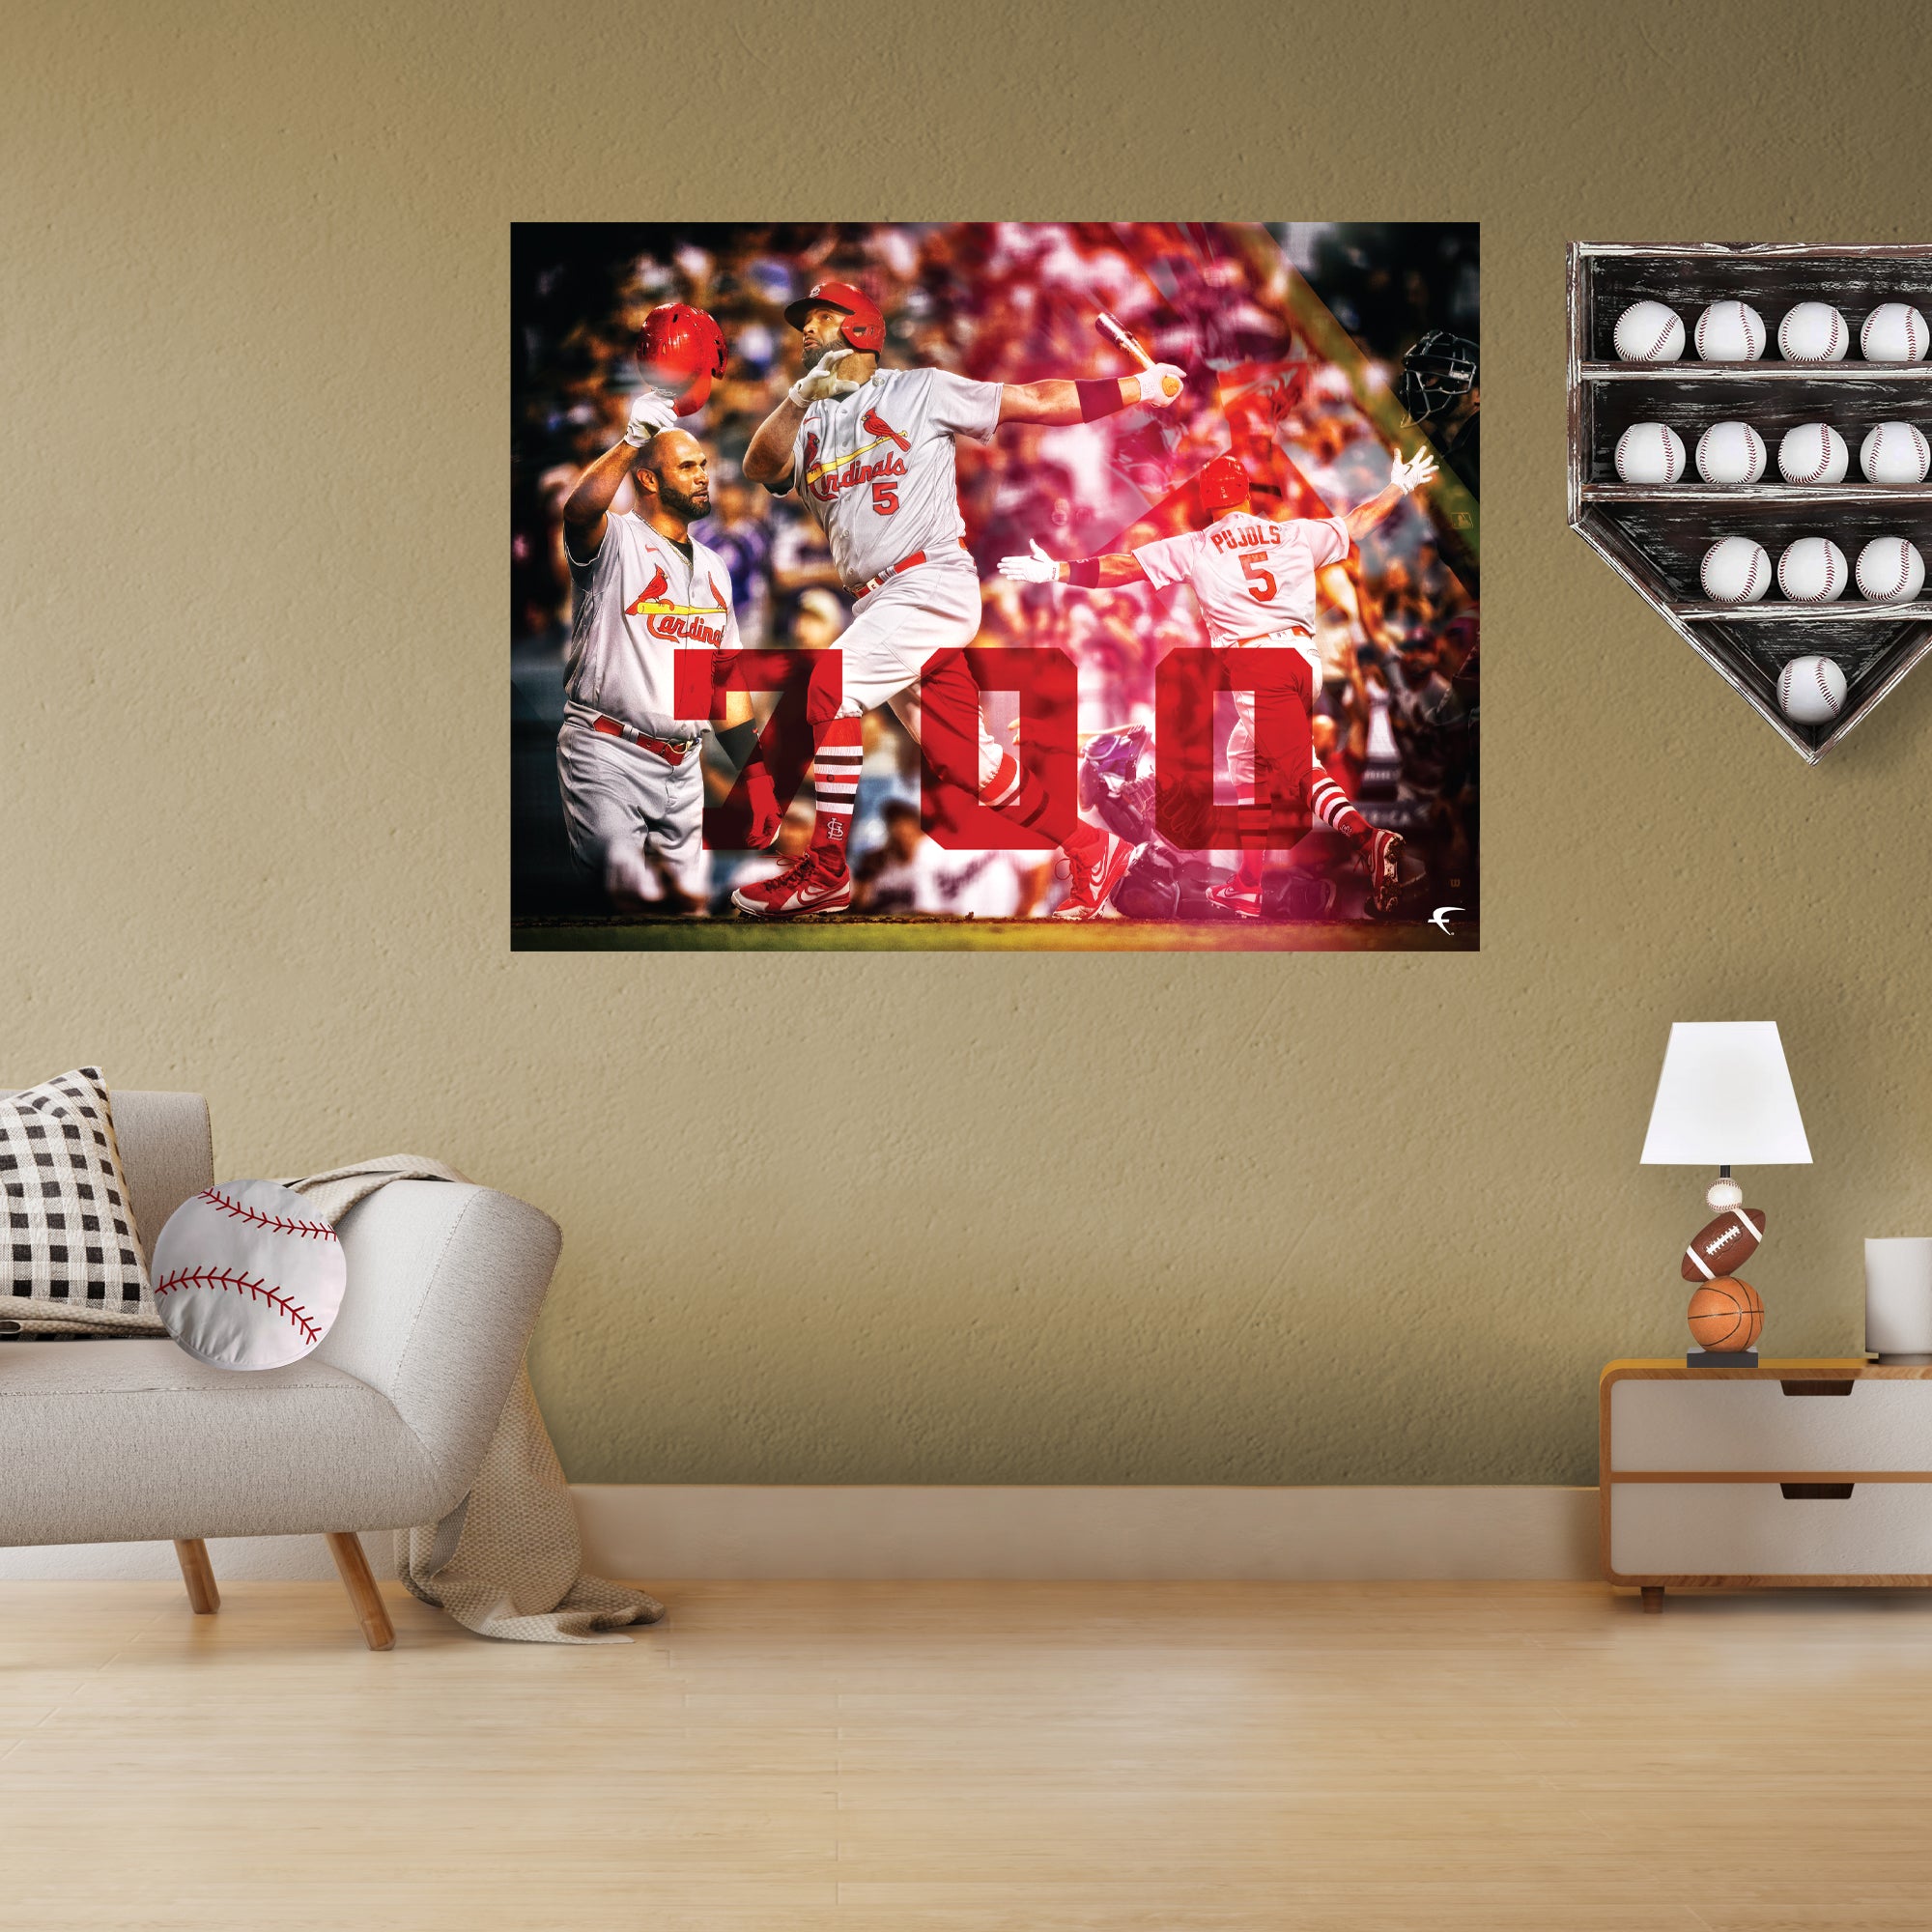 Albert Pujols Baseball Star Drawing Style Poster 7 Canvas Poster Bedroom  Decor Sports Landscape Office Room Decor Gift Frame: 24x36inch(60x90cm)